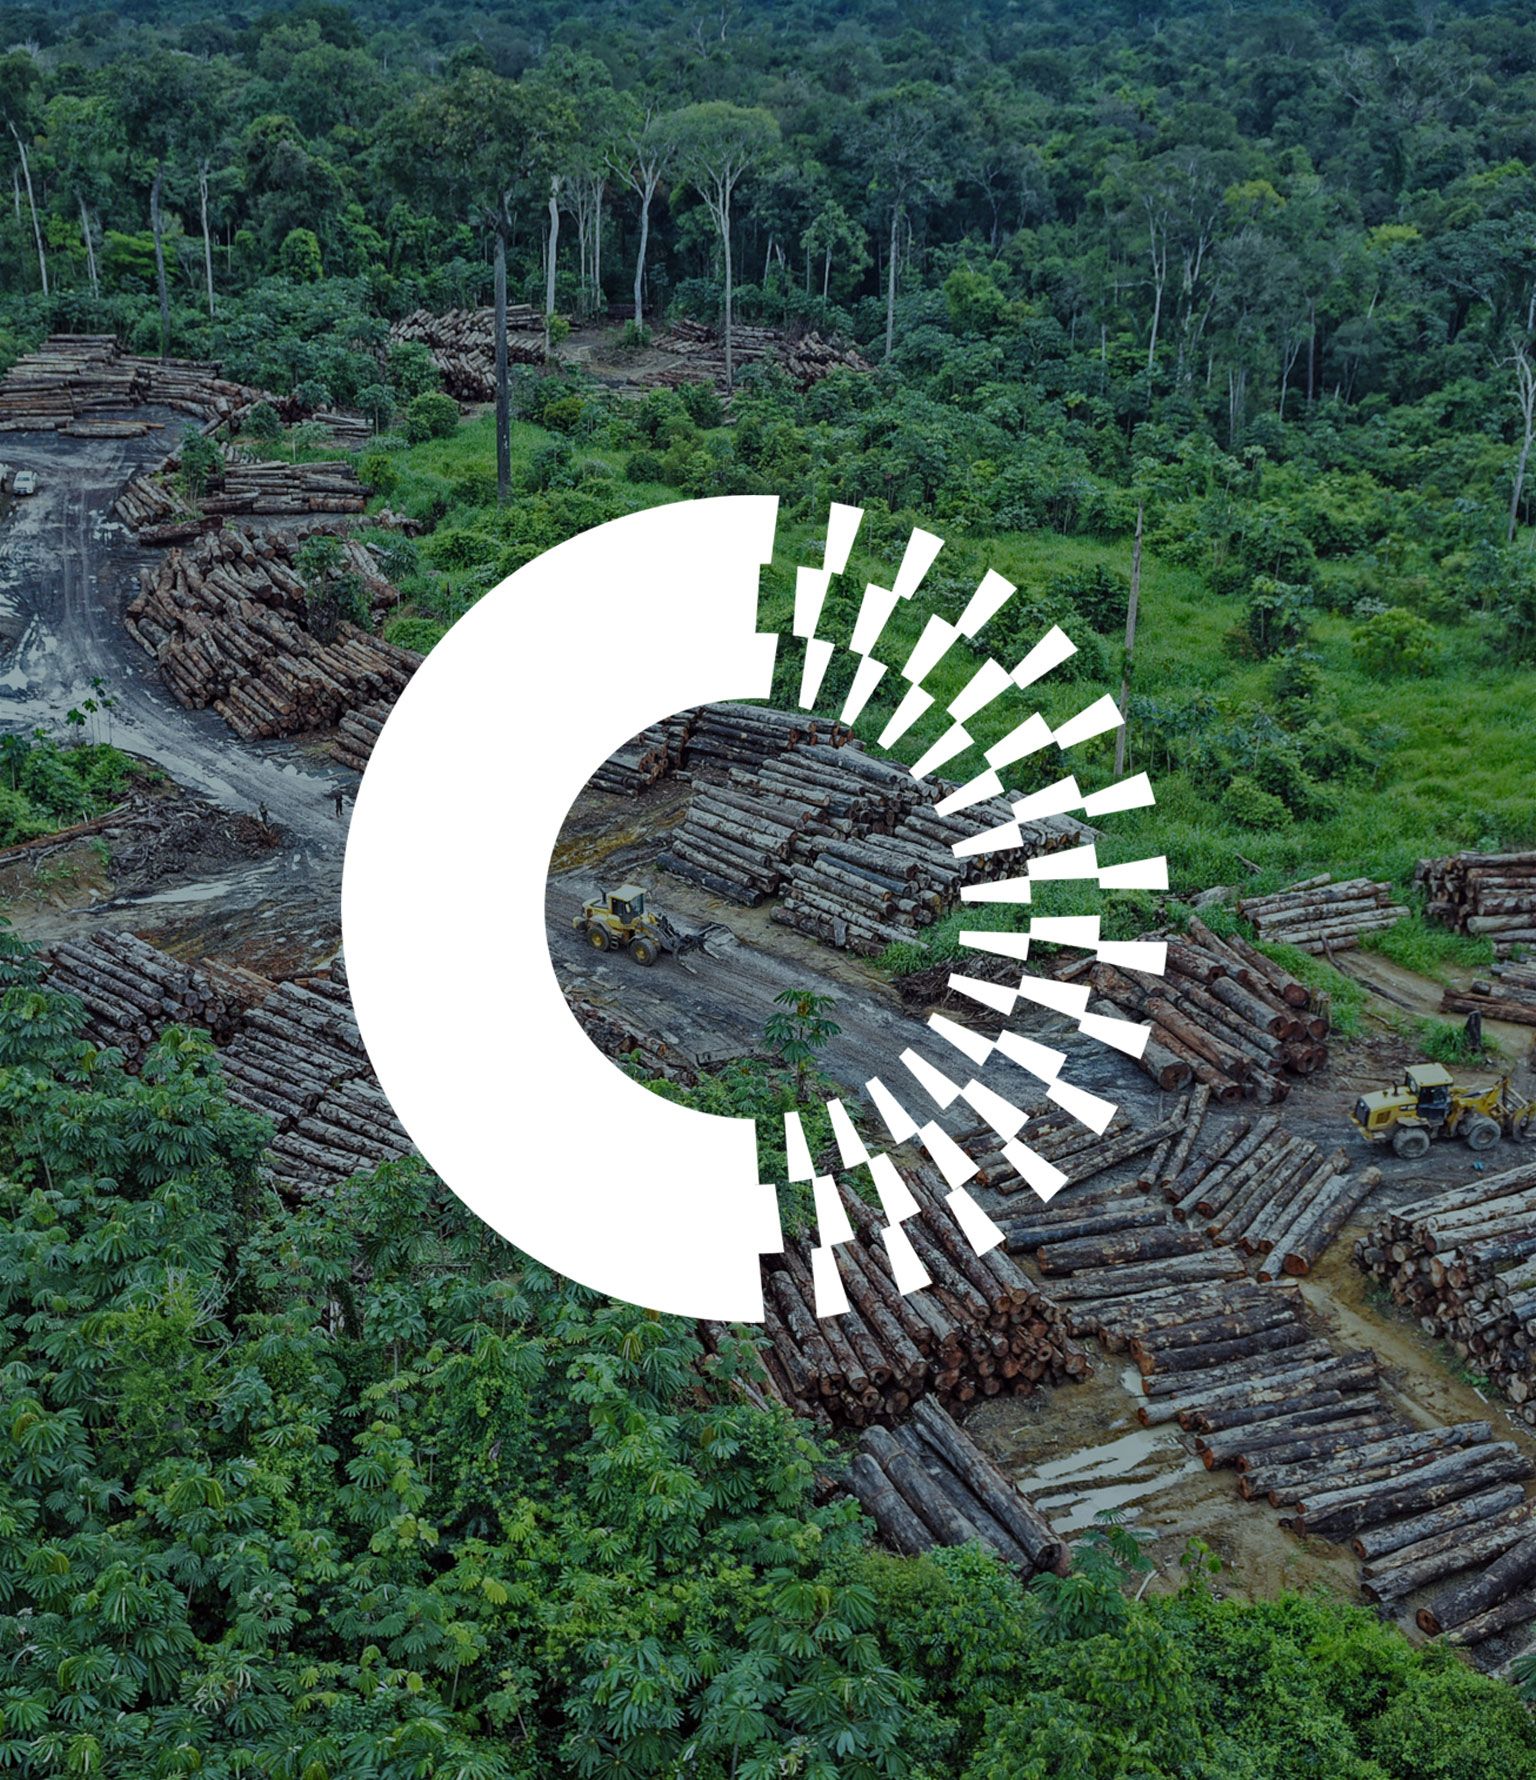 circle logo in the center of a foresting image with logs on the ground